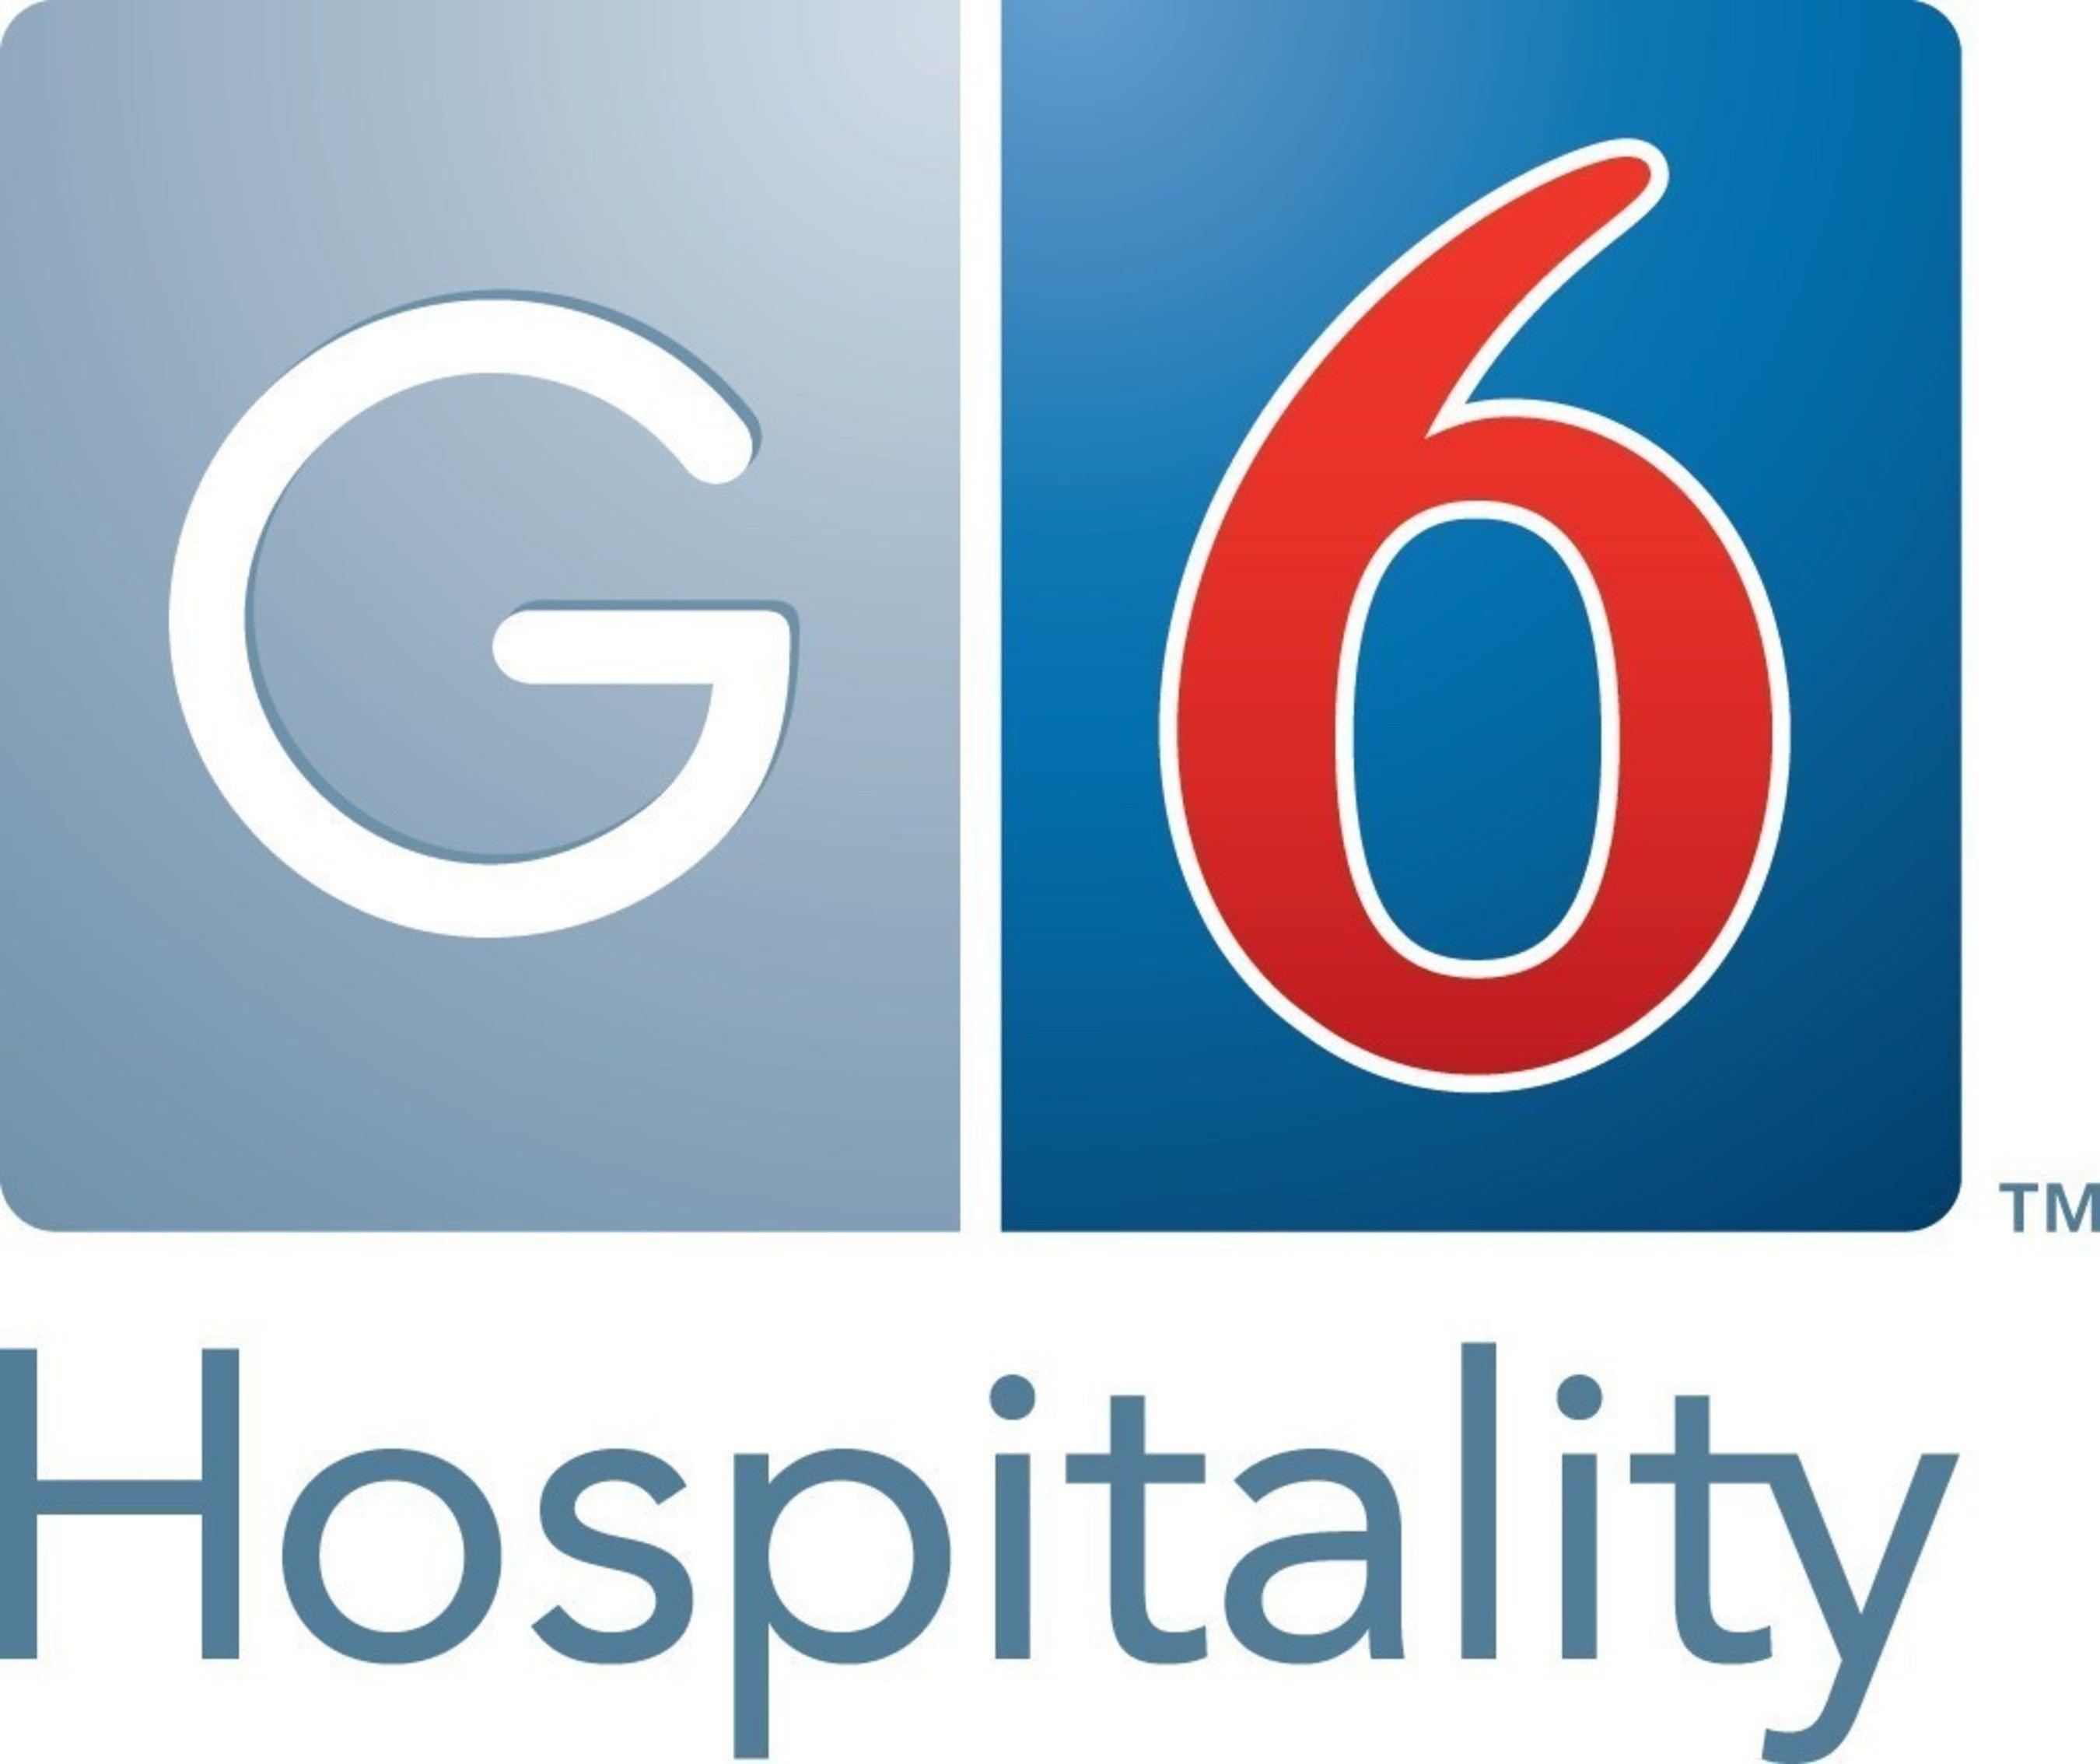 G6 Logo - G6 Hospitality Momentum Continues In Mexico